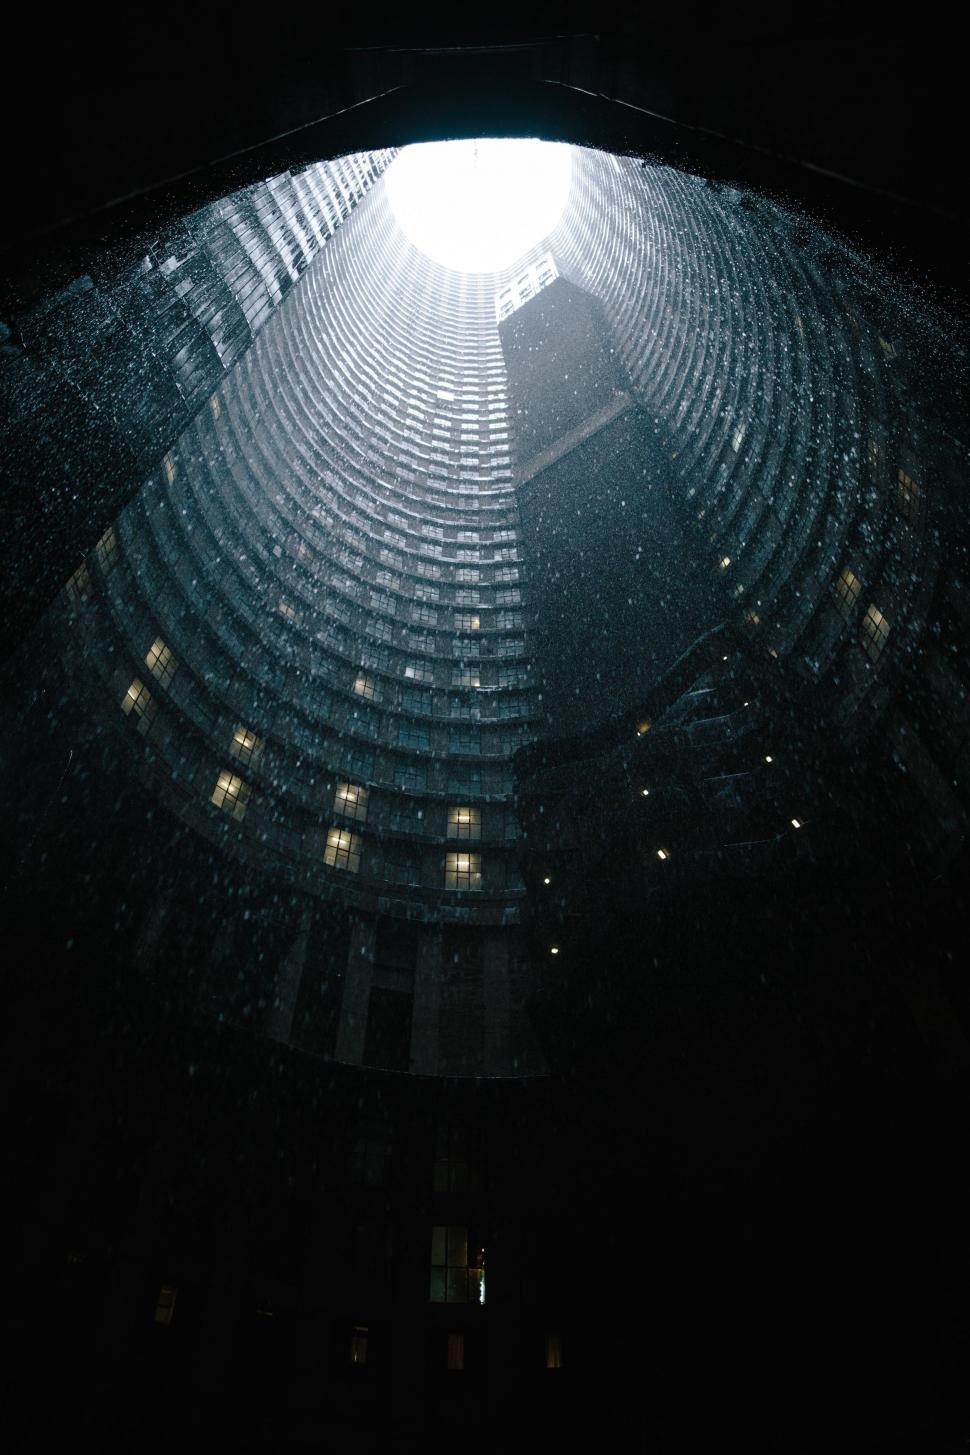 Free Image of Towering Building With Glowing Light 